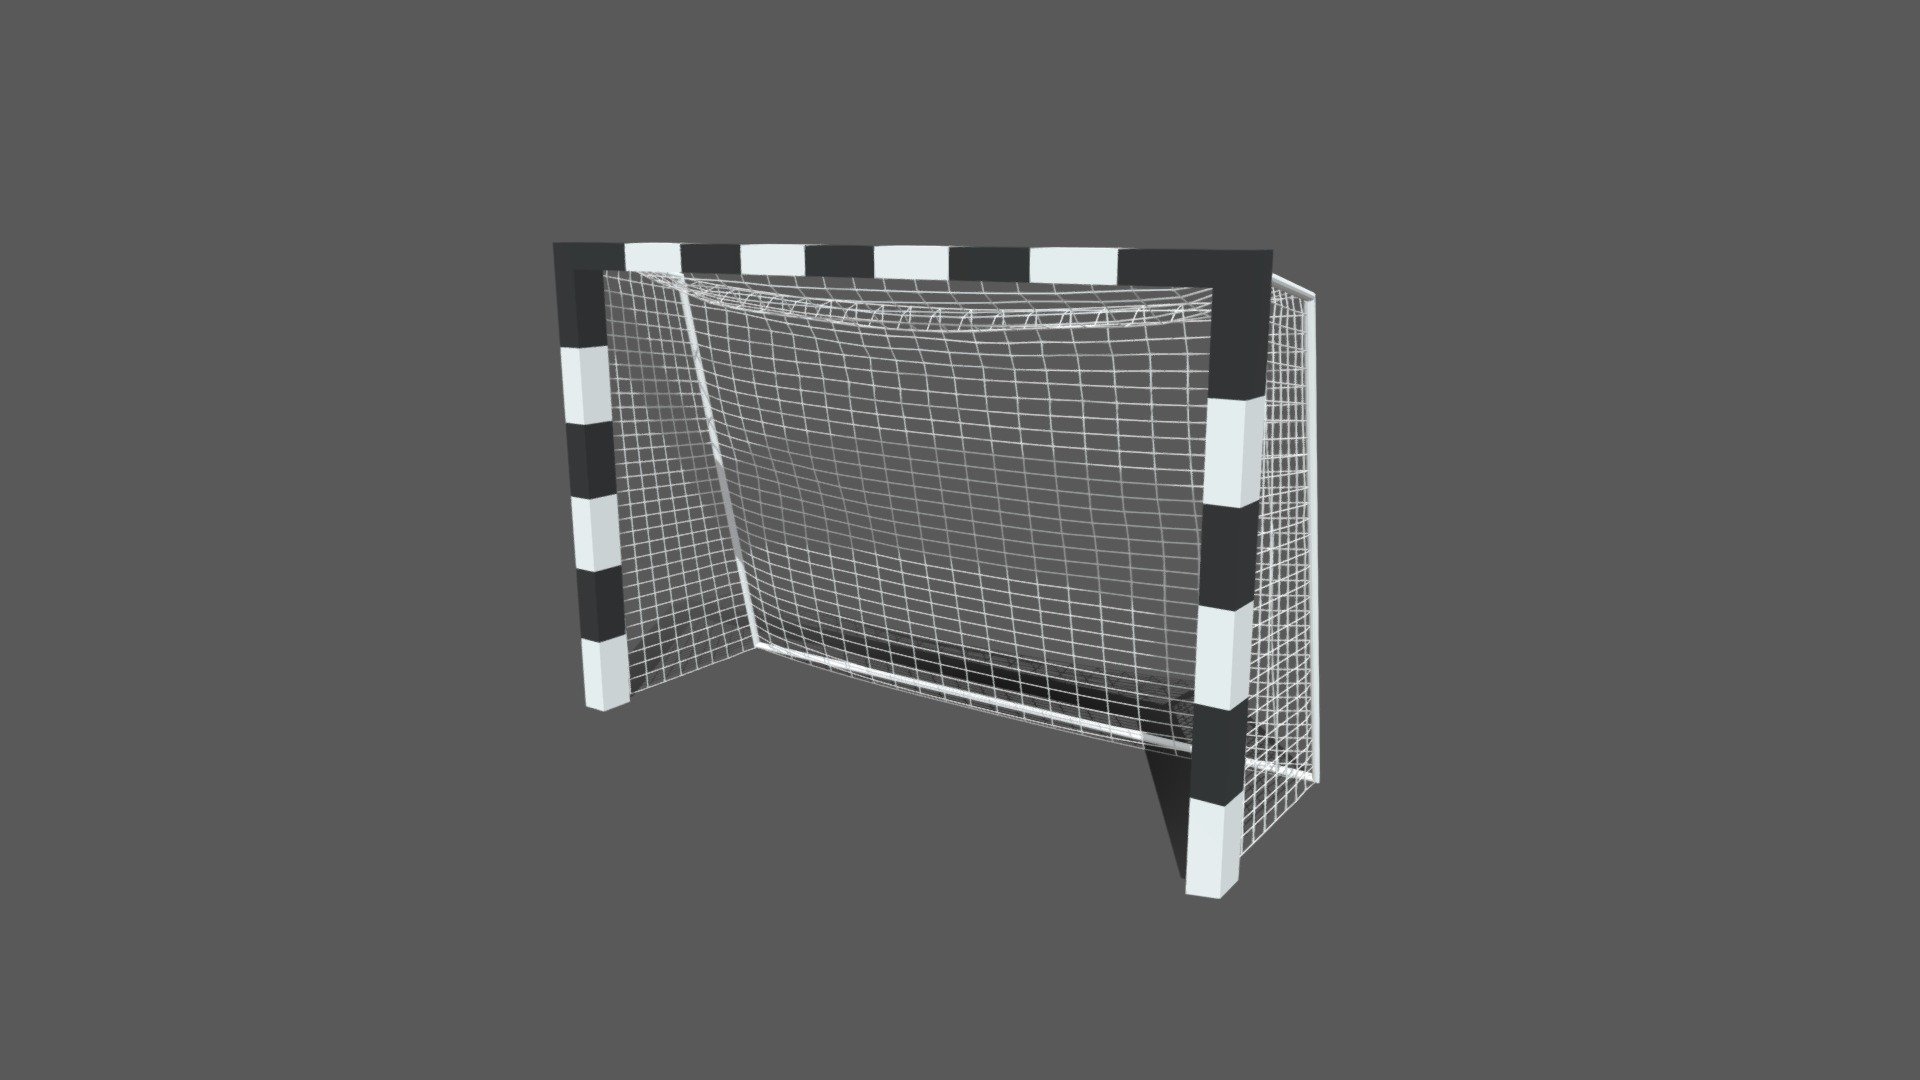 This is a  3D model of a handball goal post  The handball goalpost was modeled and prepared for cartoon style renderings, background, general CG visualization presented as 1 mesh.

Verts : 8.680 Faces : 11.338.

The 3D model have simple materials with diffuse colors.

No ring, maps and no UVW mapping is available.

The original file was created in blender. You will receive a OBJ, FBX, blend, DAE, Stl, gLTF.

All preview images were rendered with Blender Cycles. Product is ready to render out-of-the-box. Please note that the lights, cameras, and background is only included in the .blend file. The model is clean and alone in the other provided files, centred at origin and has real-world scale 3d model